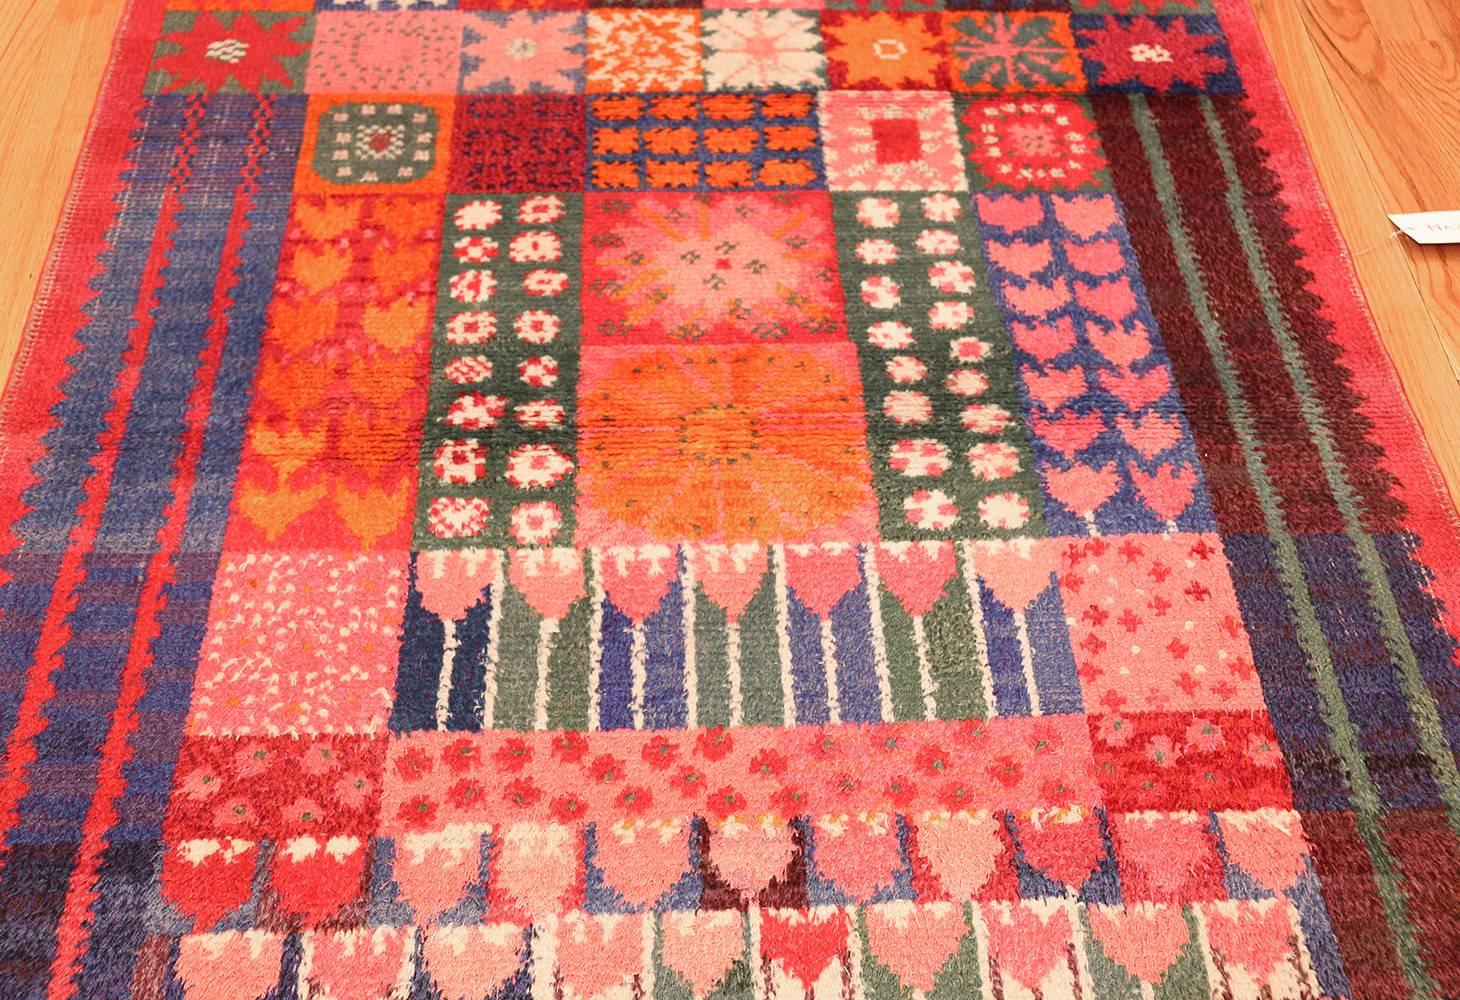 Hand-Knotted Vintage Rya Rug by Marianne Richter for Marta Maas. Size: 4 ft 6 in x 5 ft 8 in